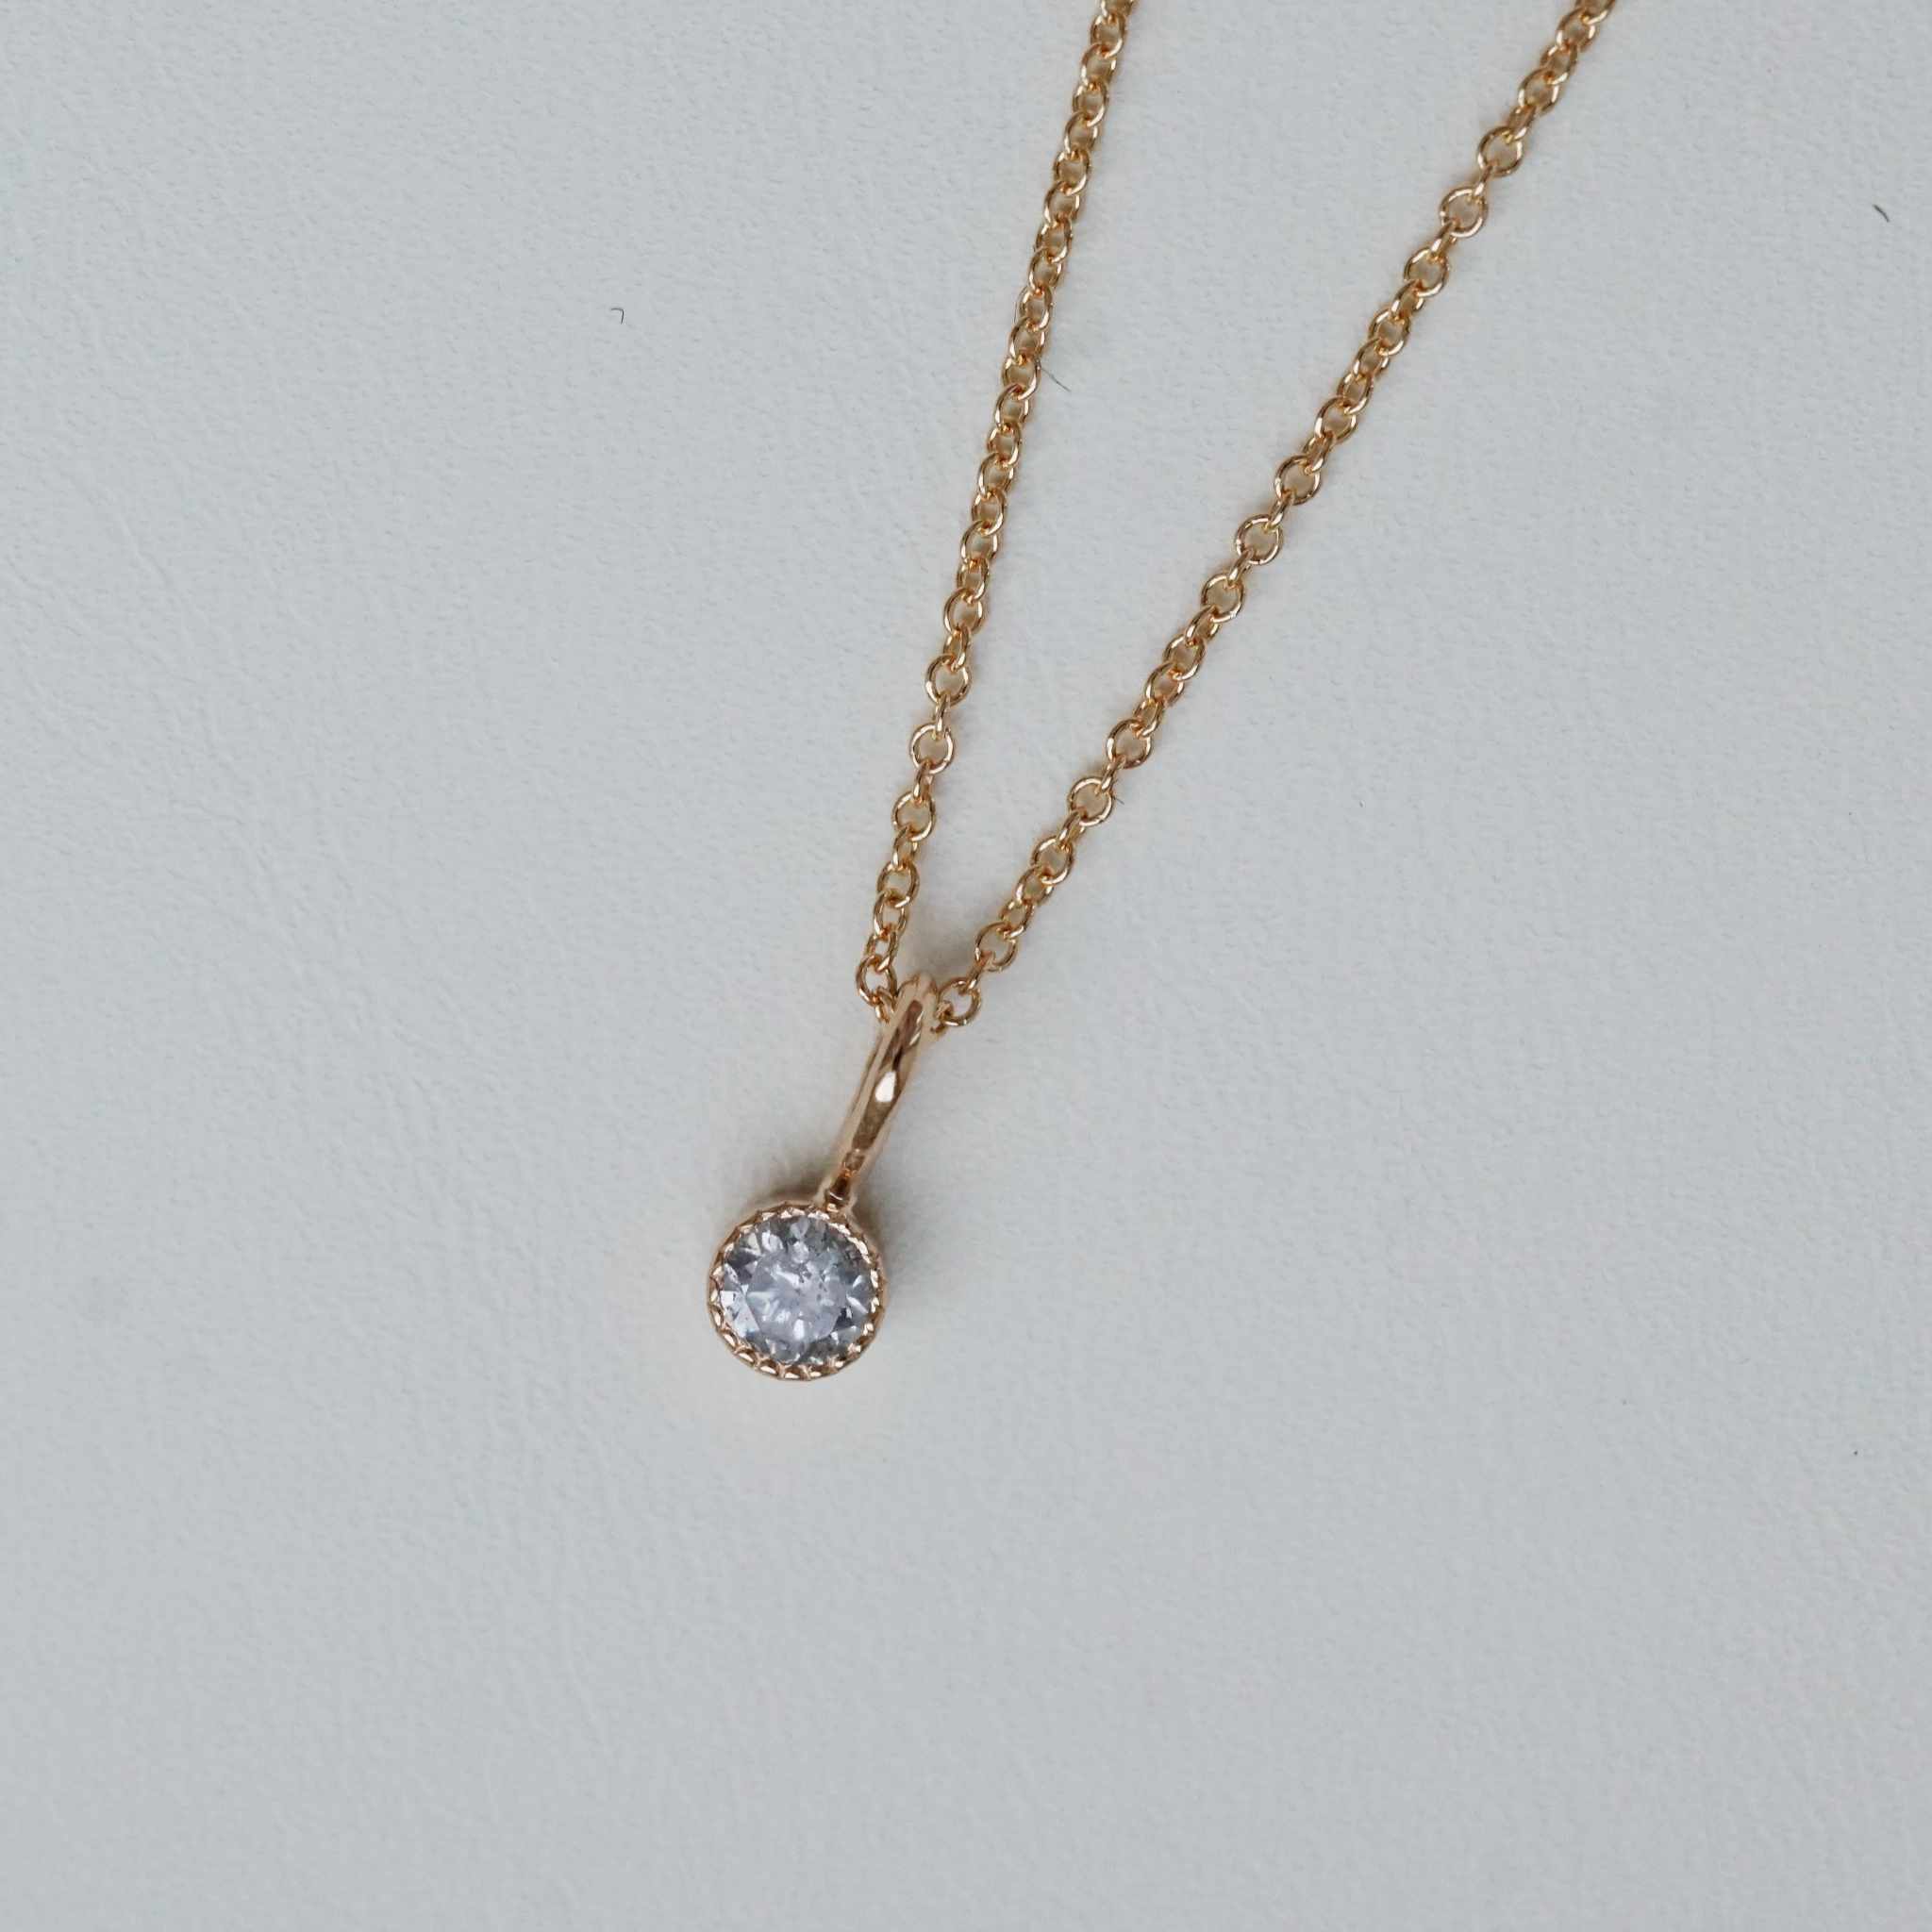 "Twinkle" pendant in gold with grey diamond